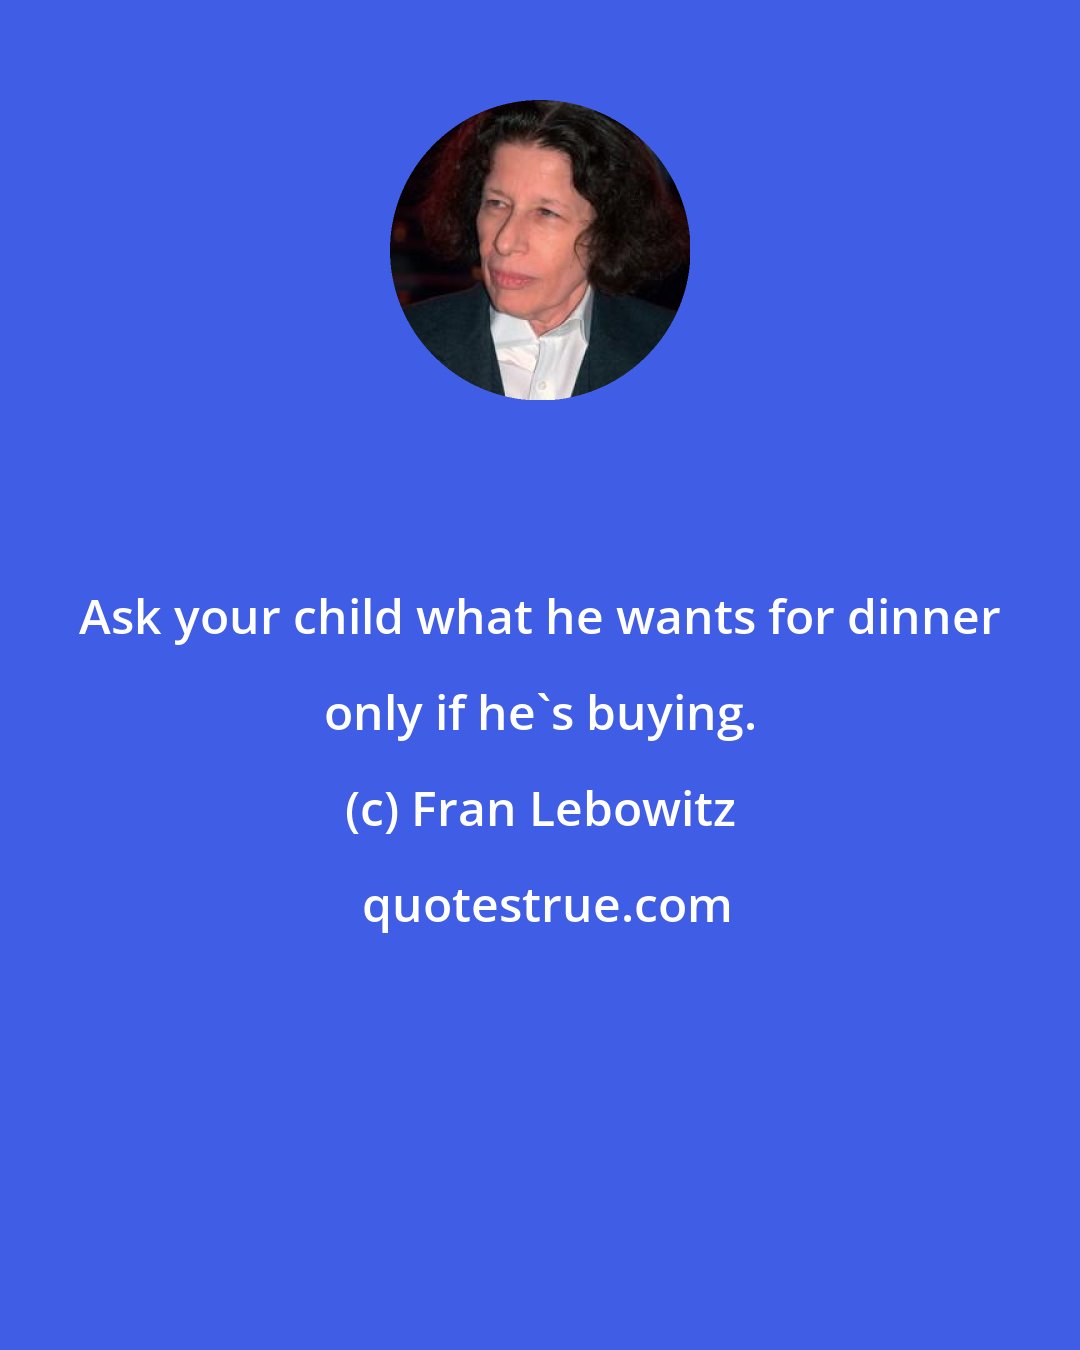 Fran Lebowitz: Ask your child what he wants for dinner only if he's buying.